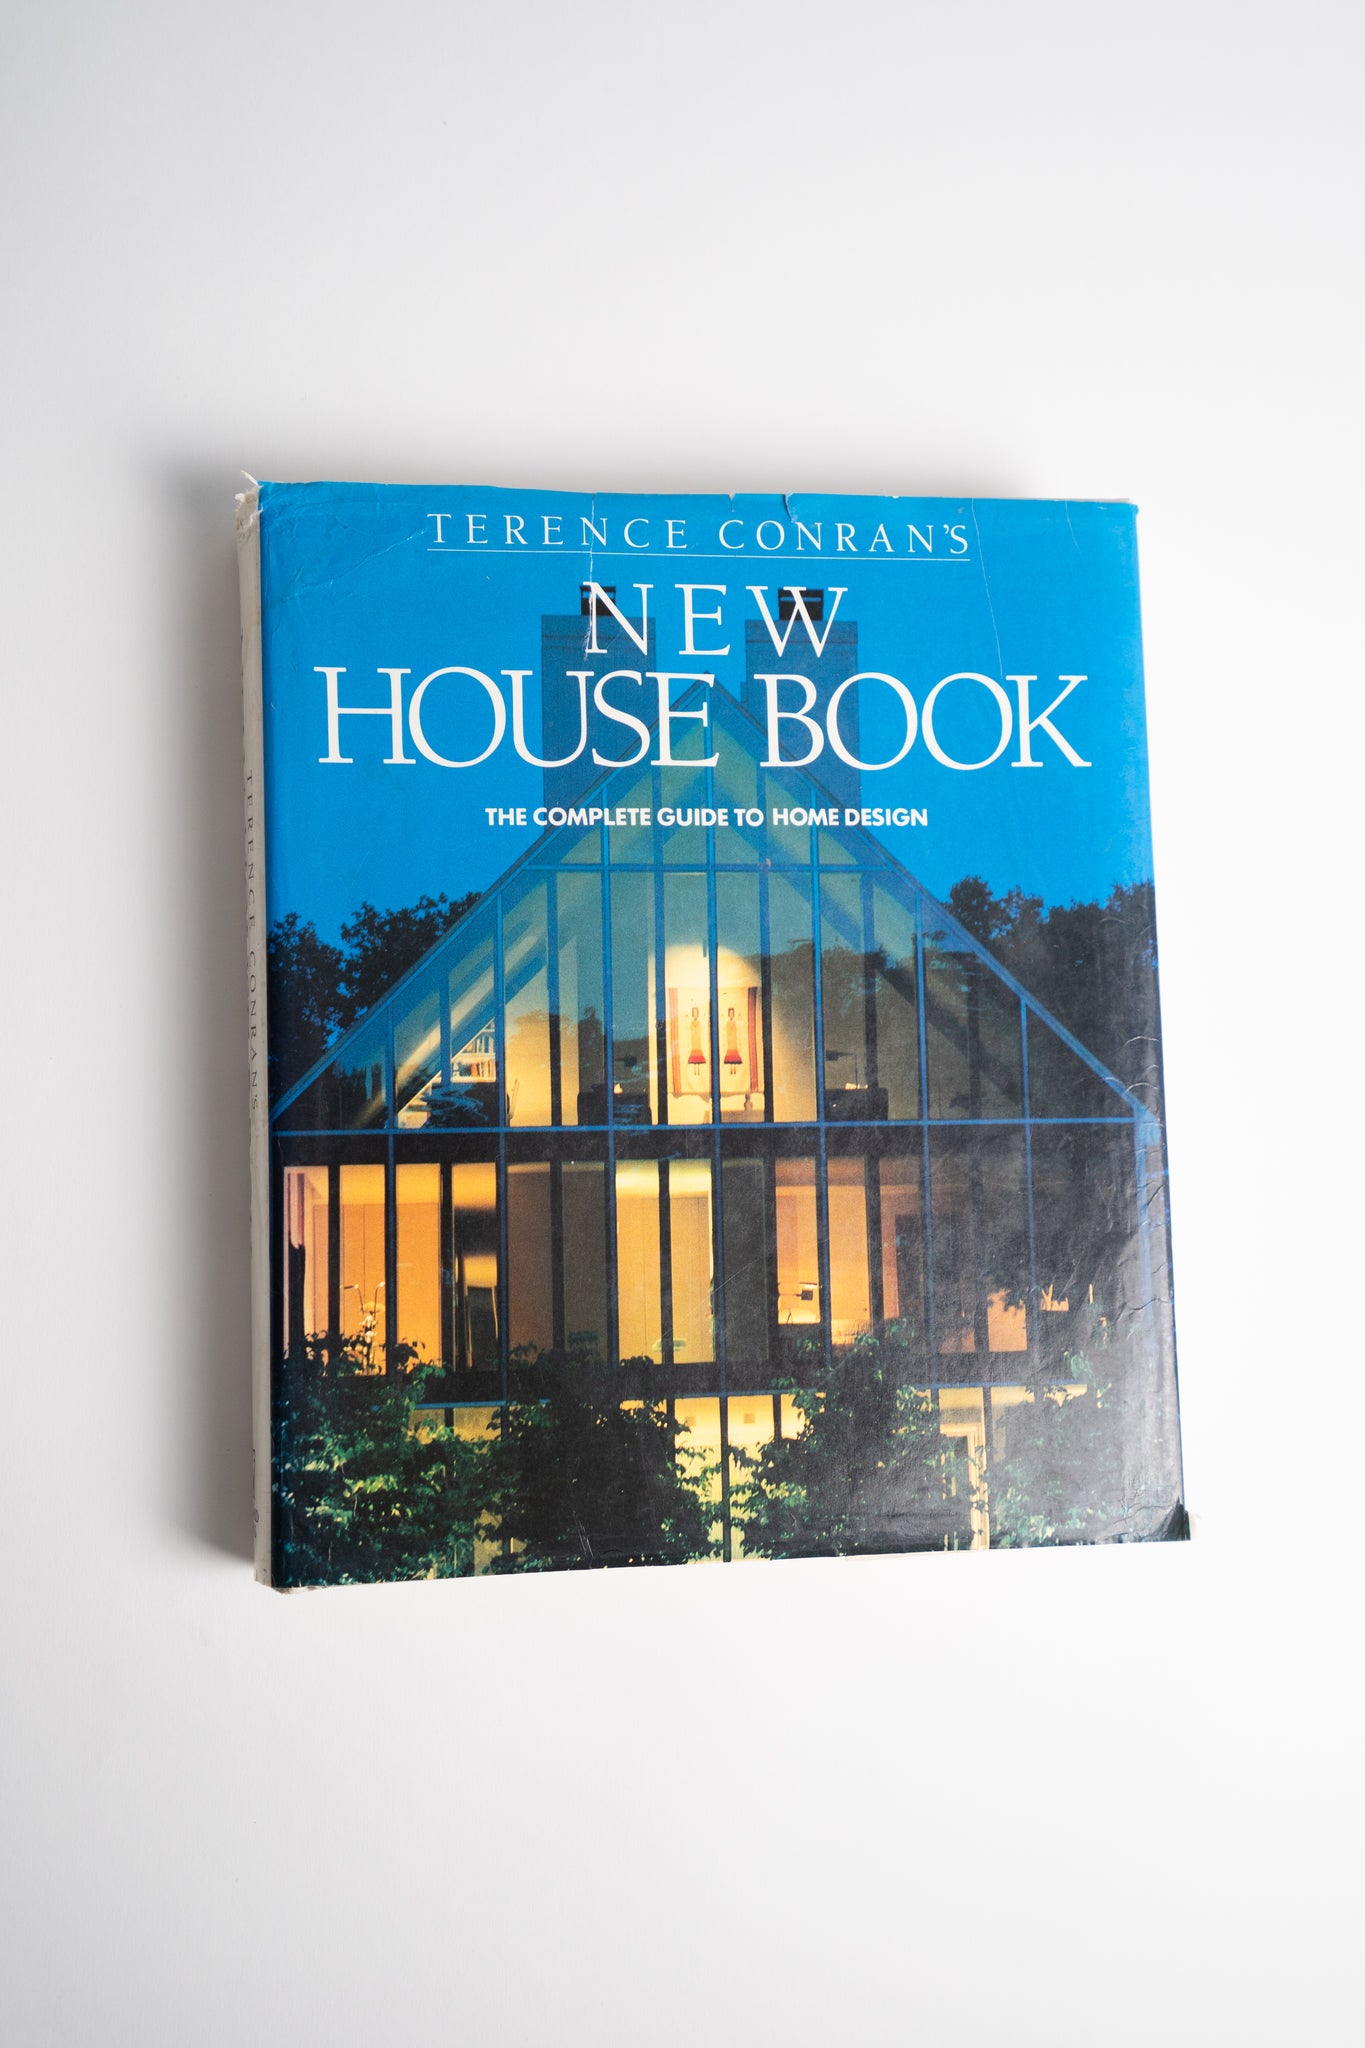 Terence Conran's New House Book (1985)